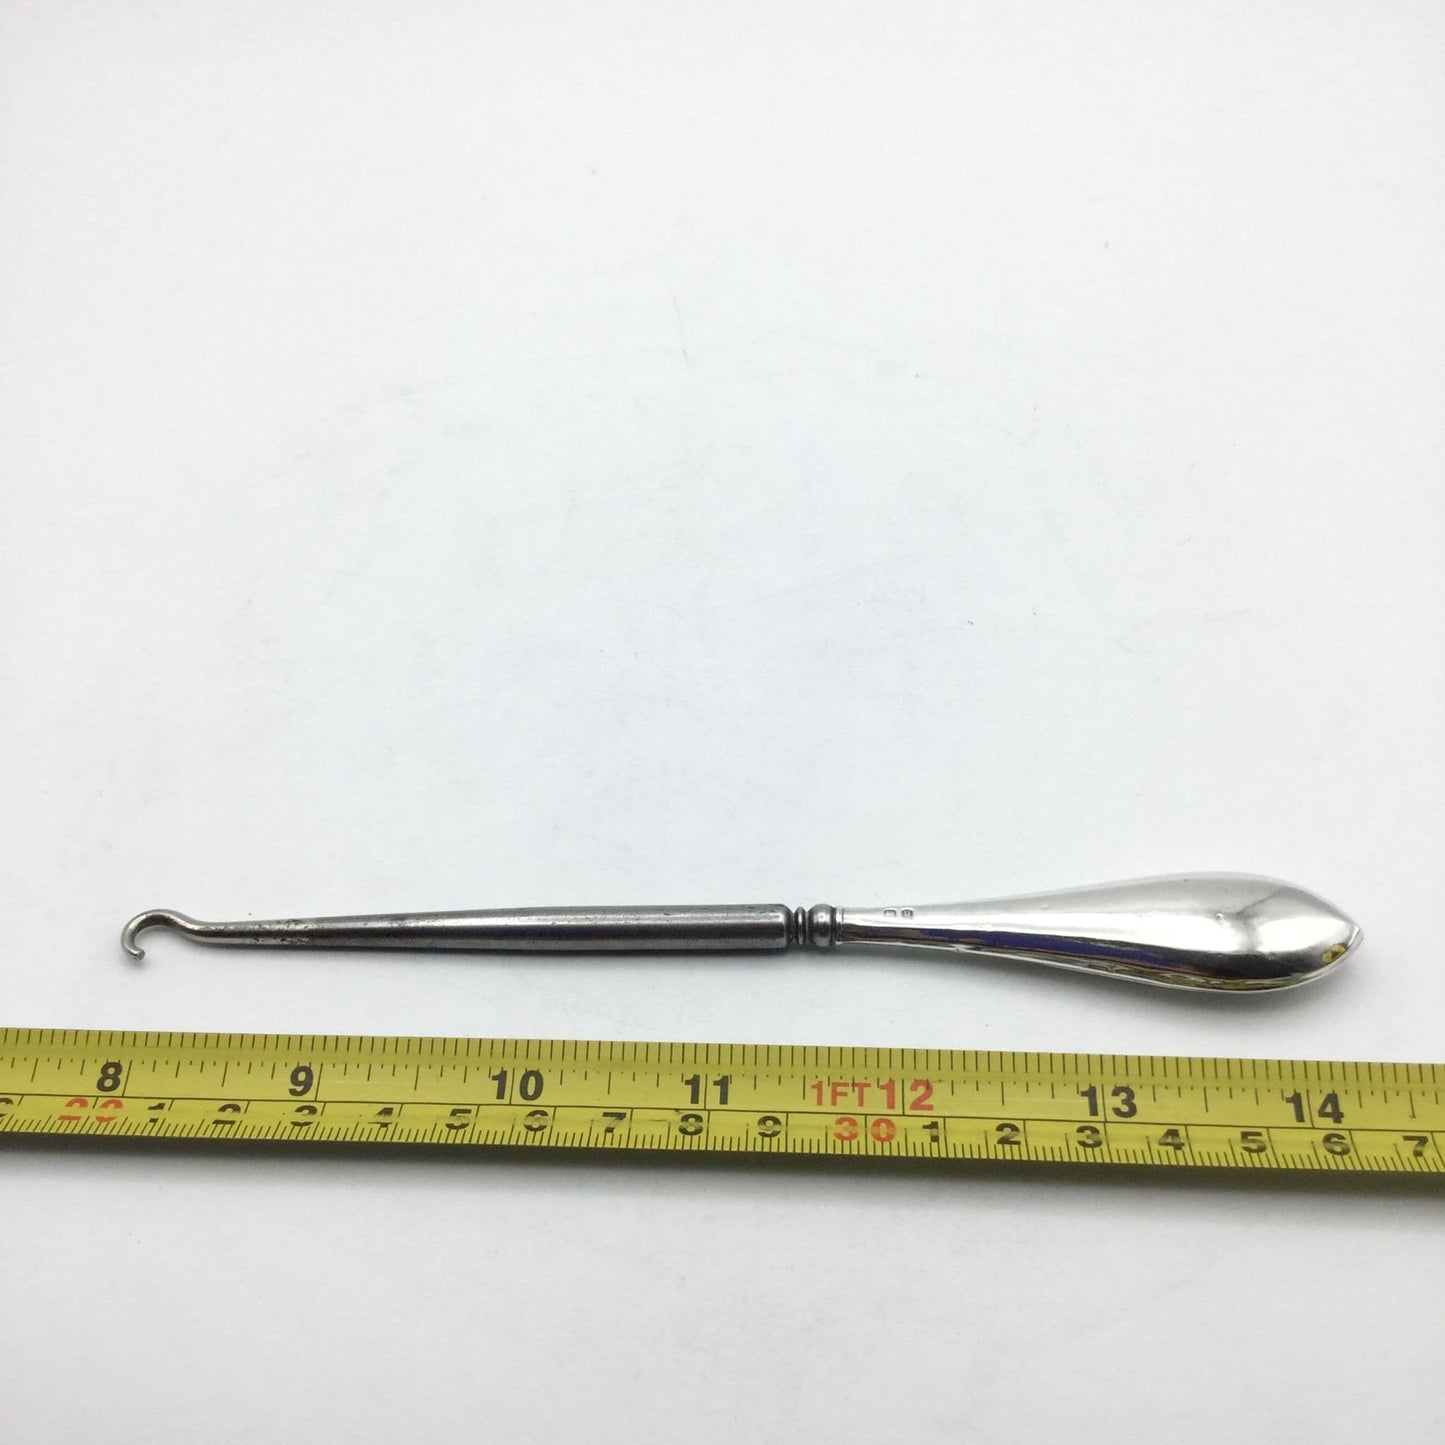 Silver handled button hook with a shiny handle and steel hook next to a tape measure showing the length as 16.5cm